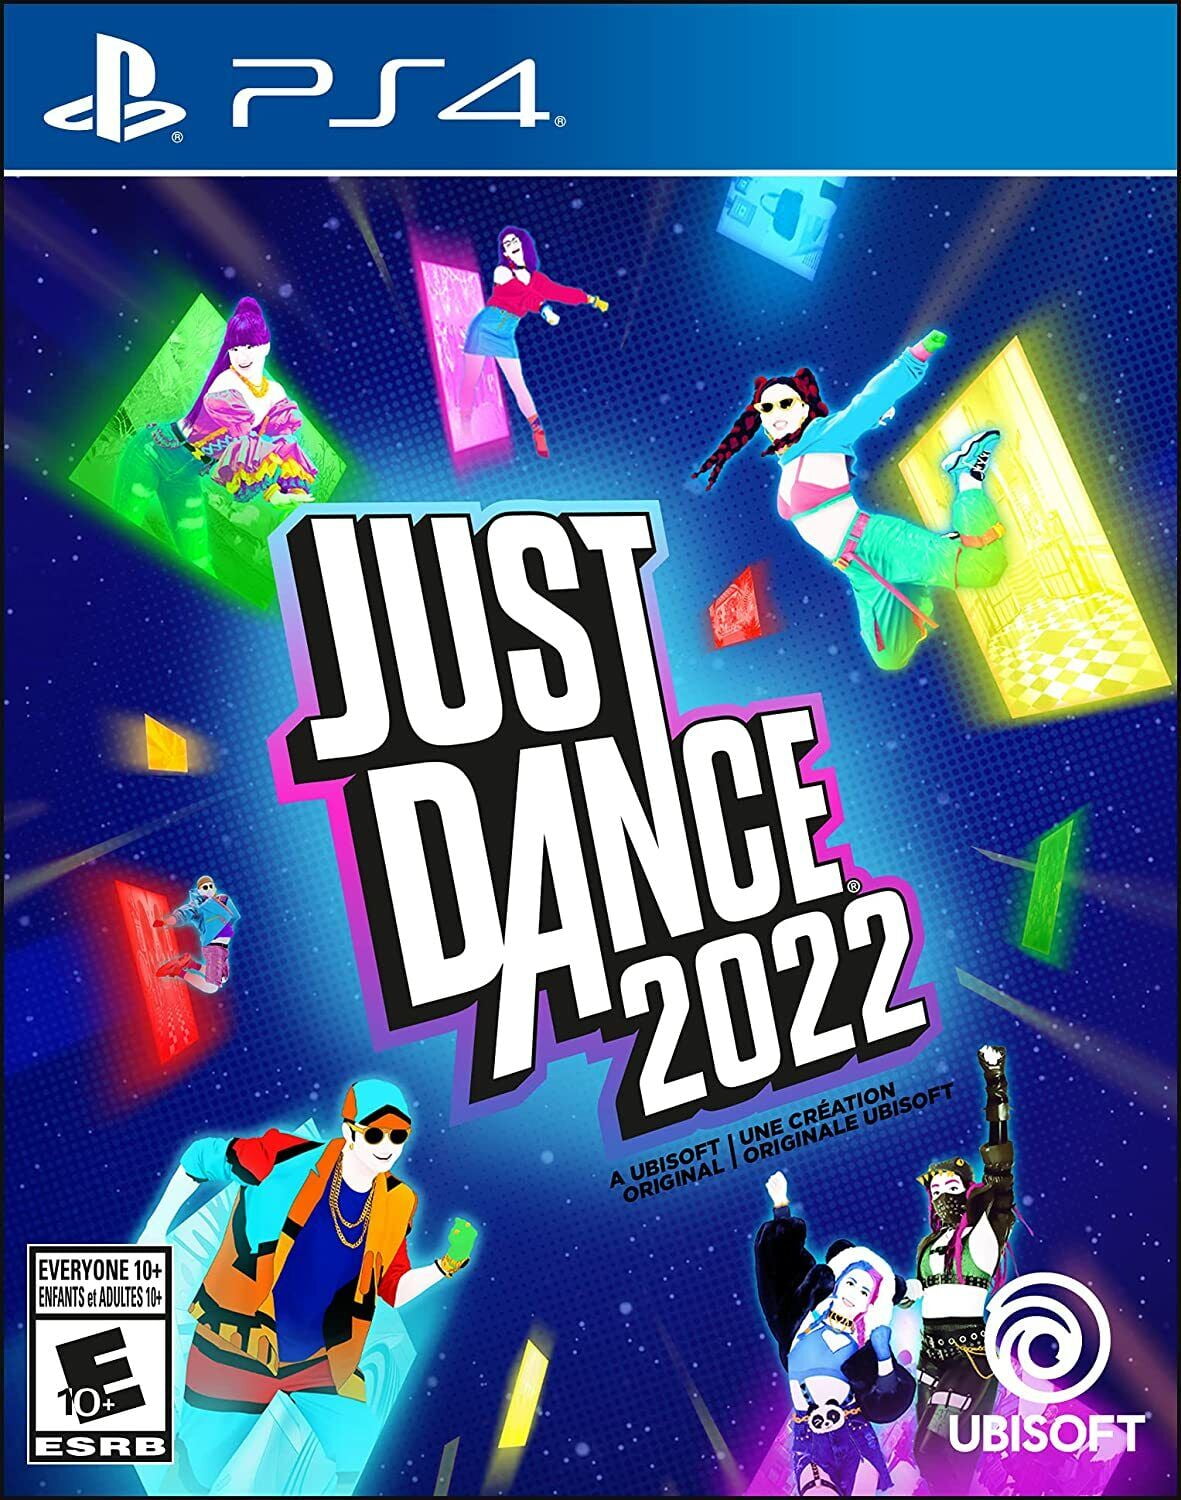 Just Dance PlayStation 4 Ubisoft Multiplayer] [PS4 2022 NEW - Fitness Sony